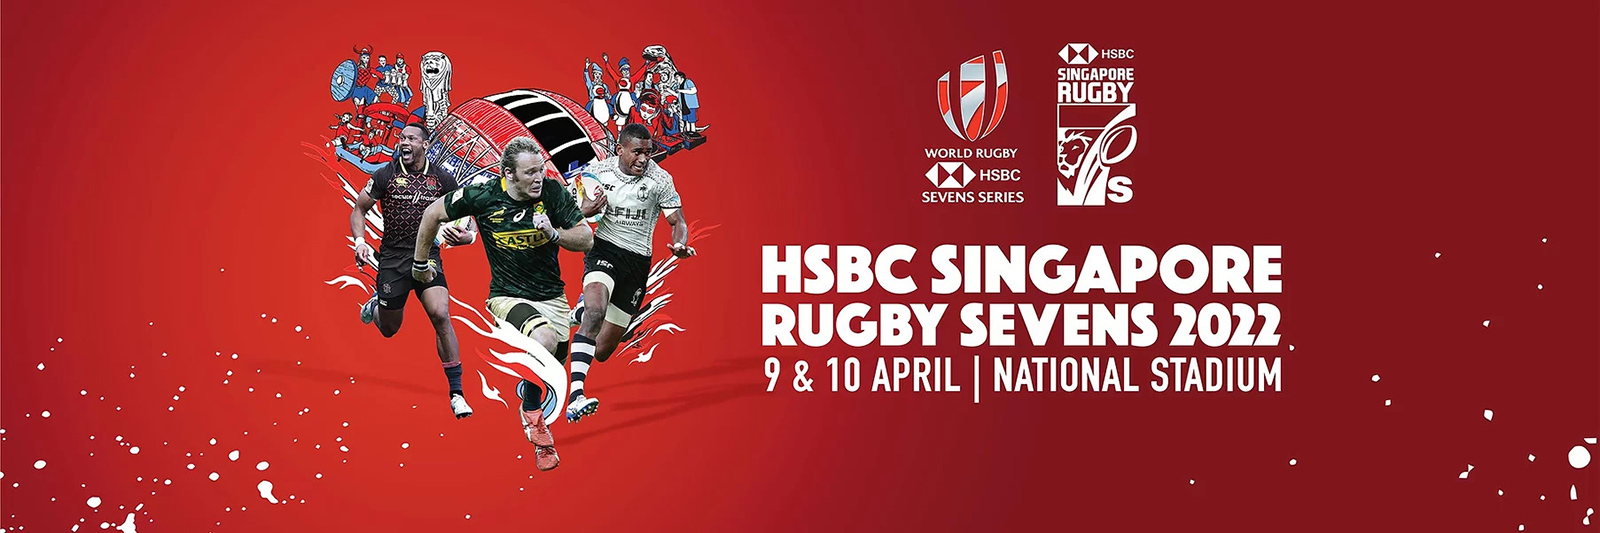 The Game is back HSBC Singapore Rugby Sevens returns to the Singapore